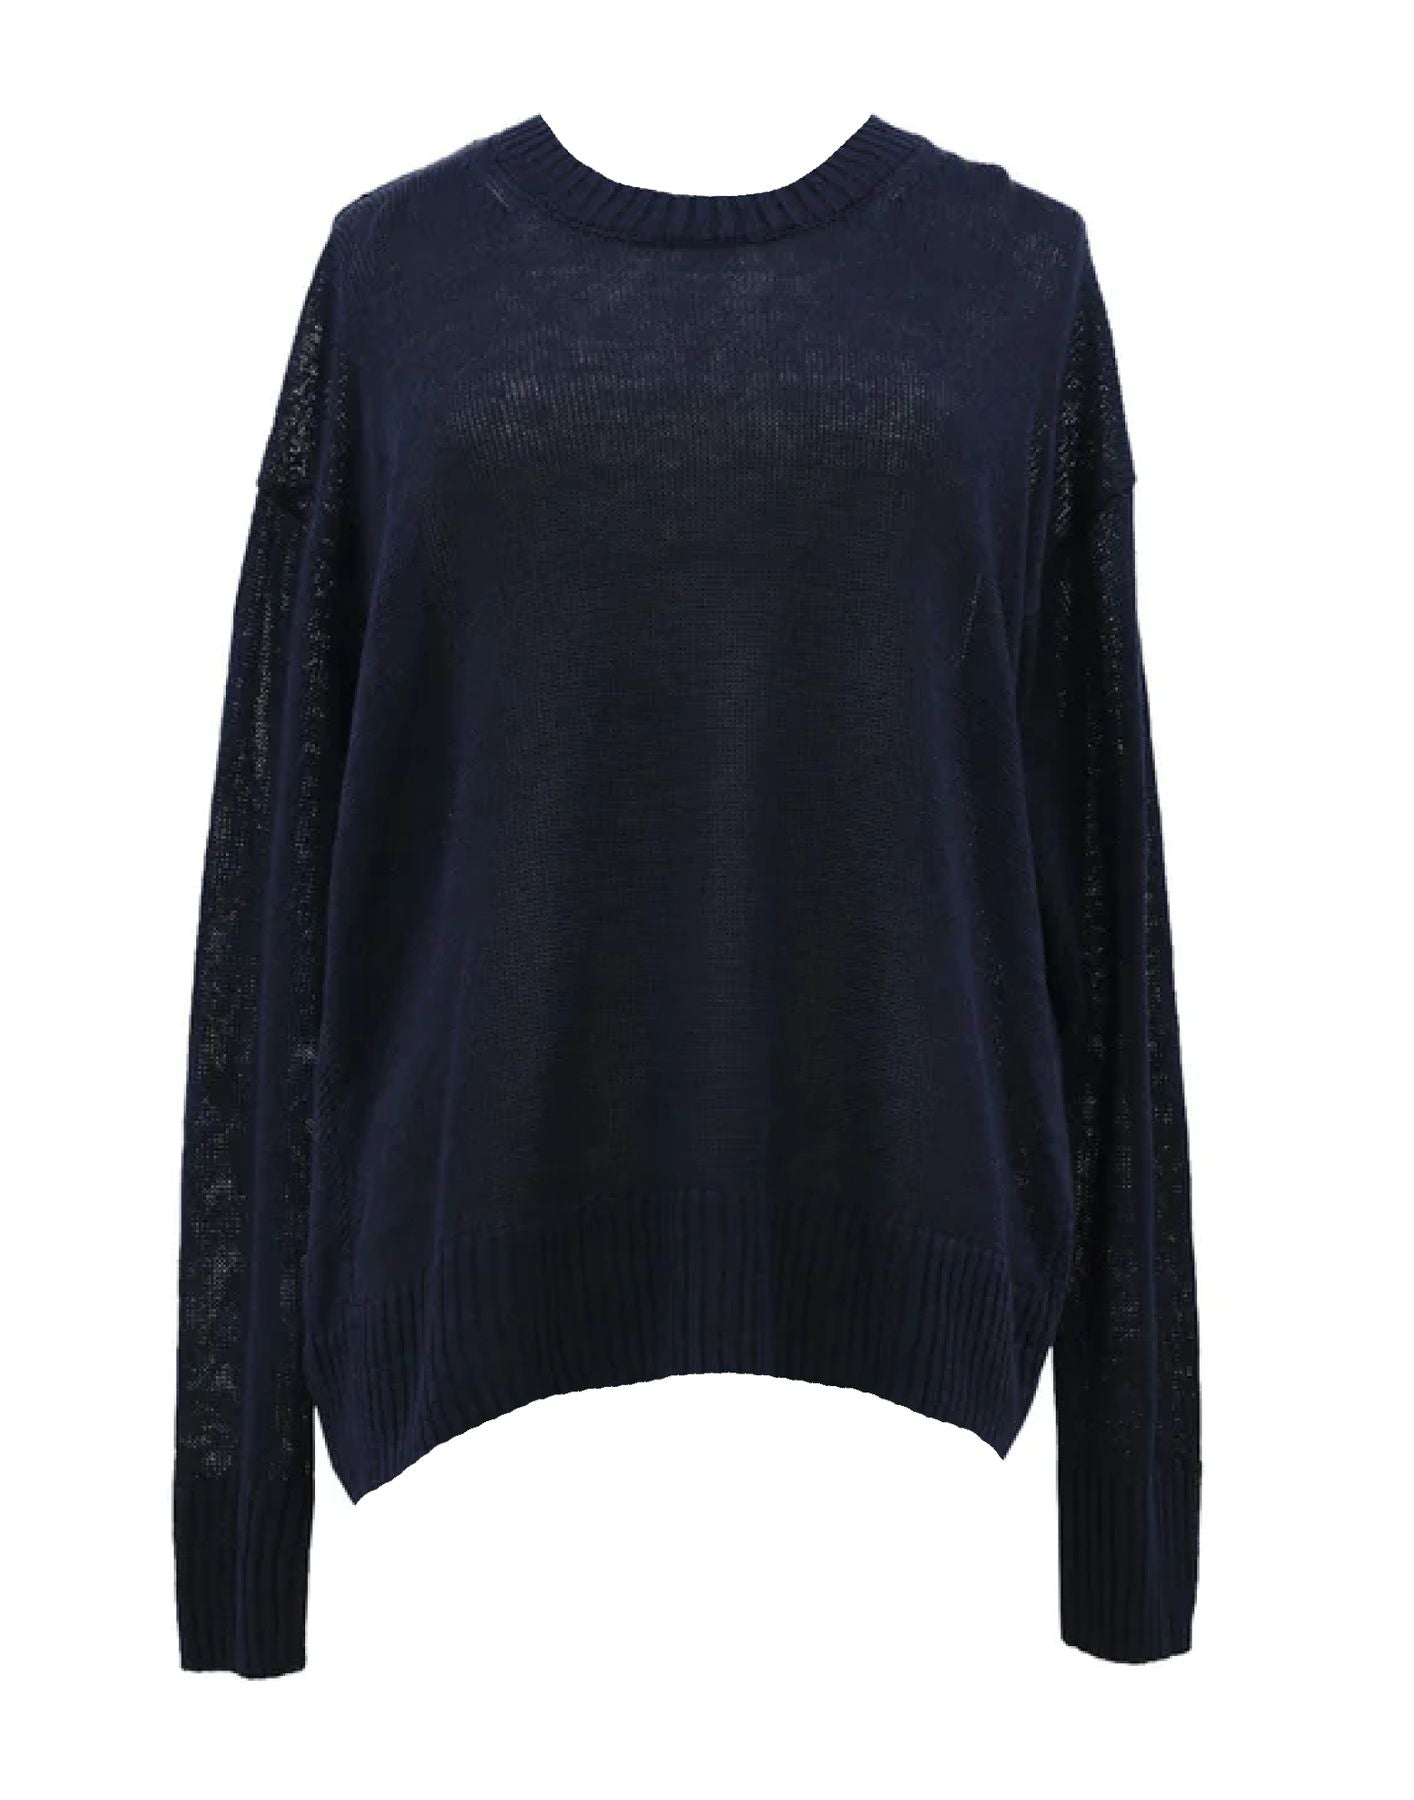 Sweater for woman CT24132 BLACK NAVY C.T. plage